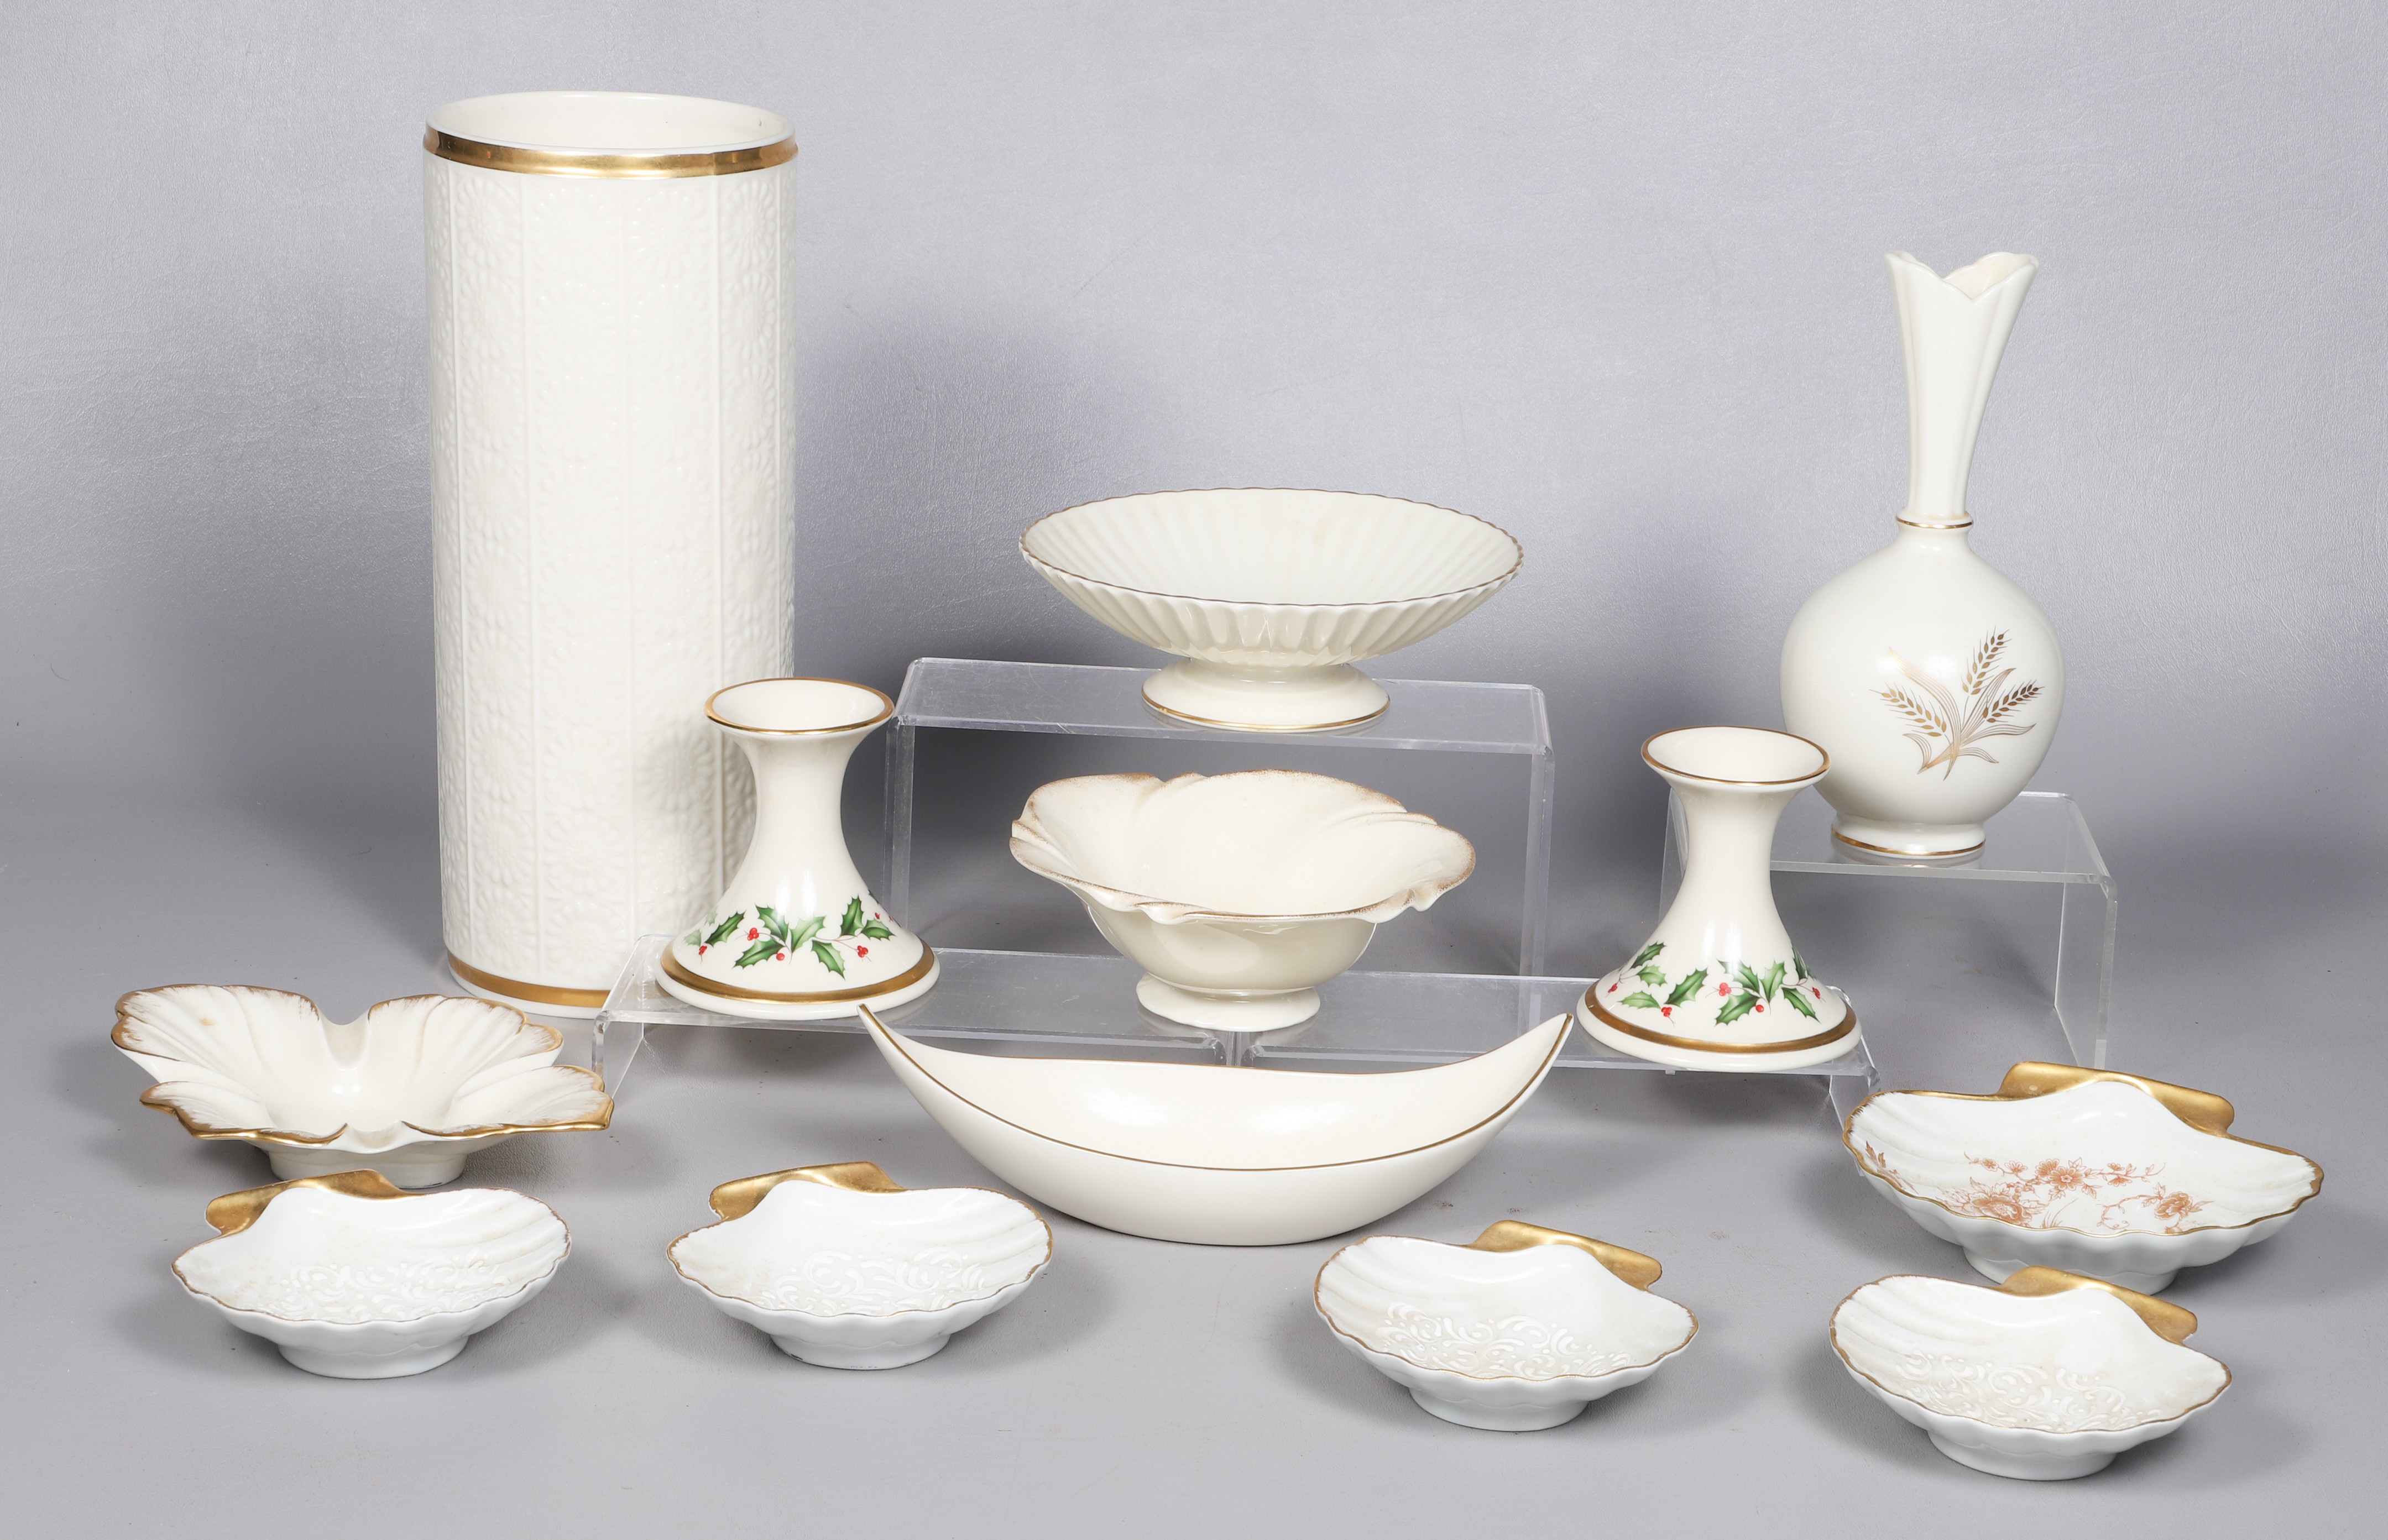 Lenox vases and table items to